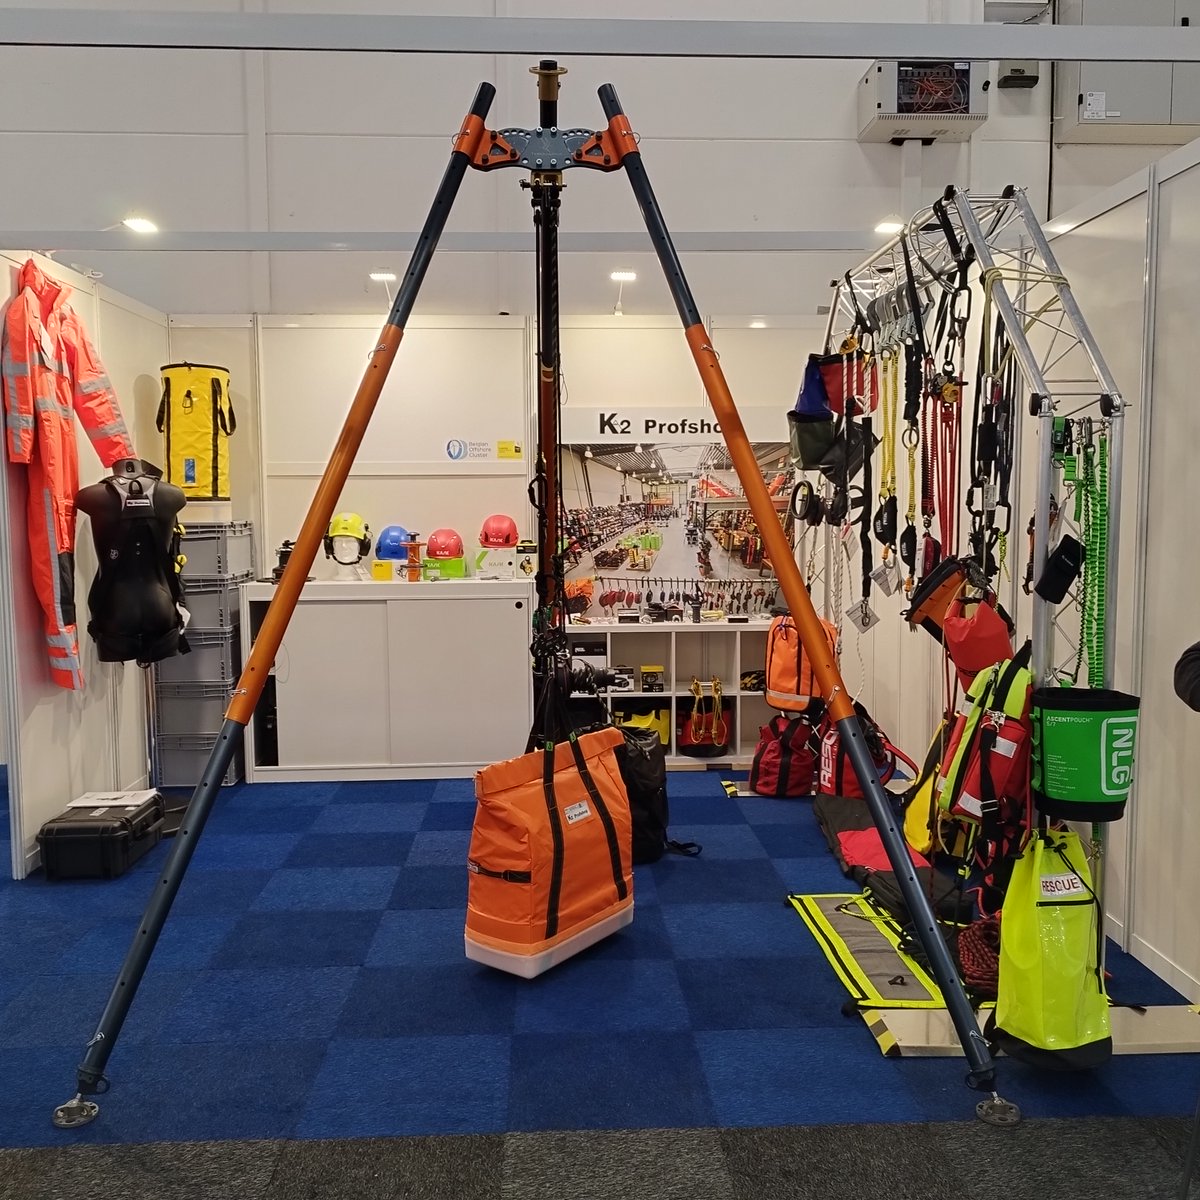 When working at heights of up to 130 metres, the safety of the technicians is extremely important. The Belgian company K2 ProfShop specializes in equipment for safety and rescue. #windenergy #onshoreenergy #offshoreenergy #theidealconnection